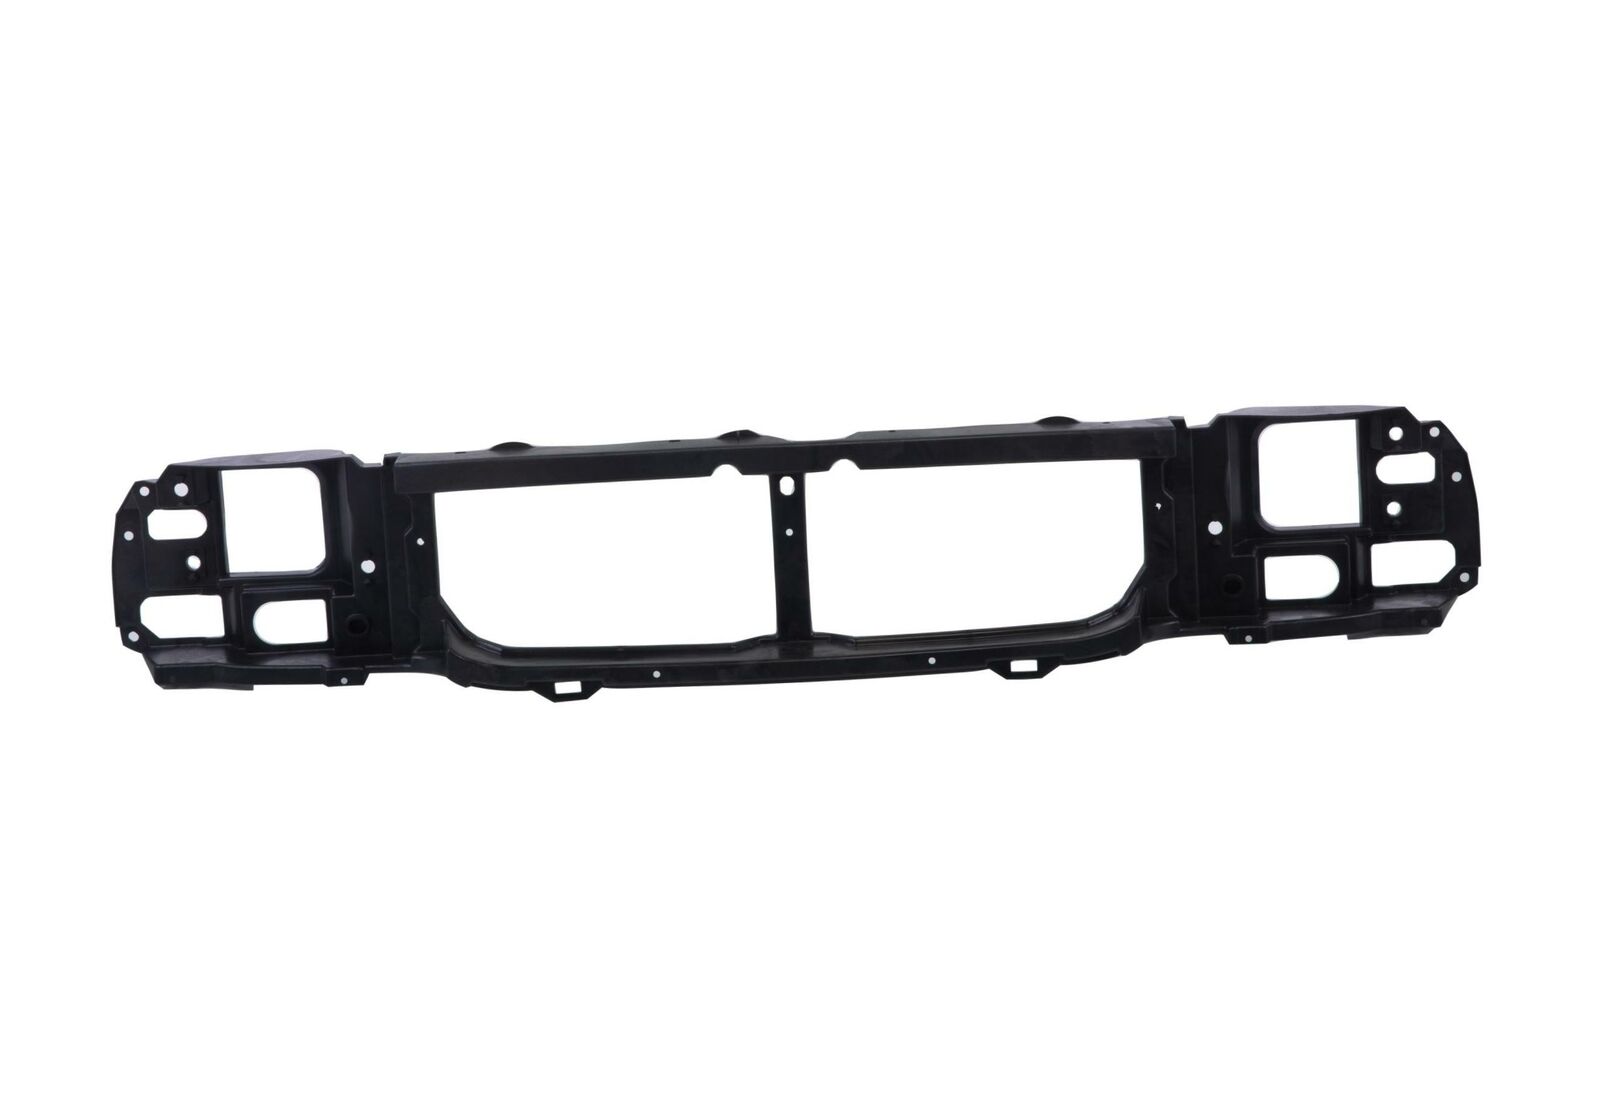 Header Panel Support Replacement Fit 98-00 Ford Ranger Pickup Truck